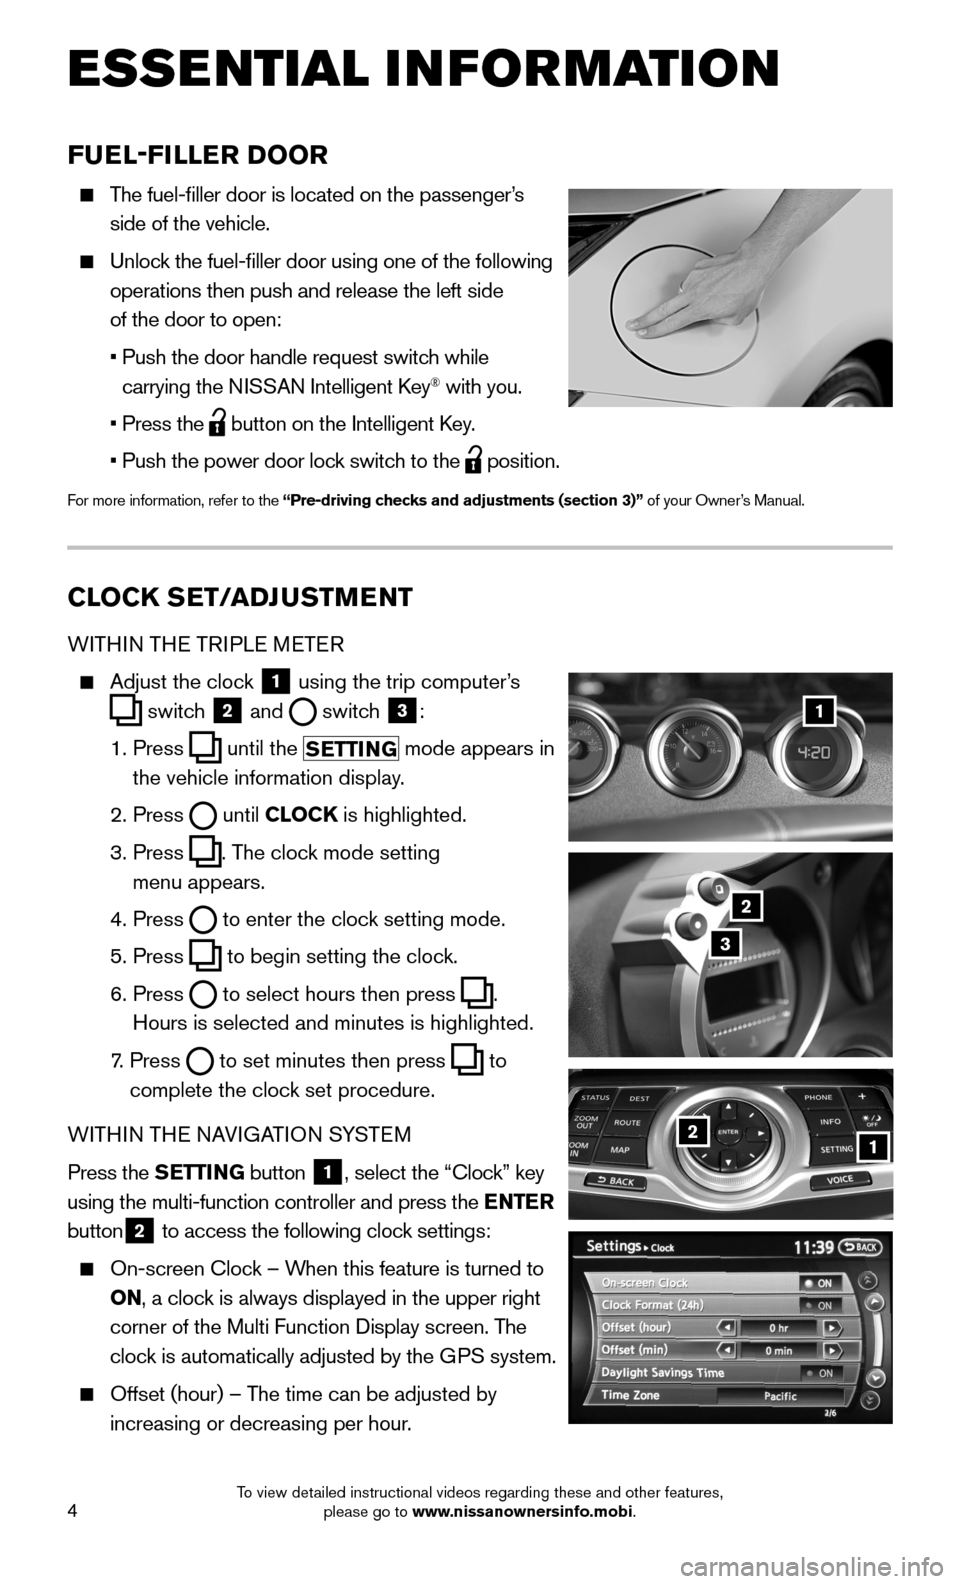 NISSAN 370Z ROADSTER 2015 Z34 Quick Reference Guide 4
ESSE NTIAL I N FOR MATION
CLOCK SET/ADJUSTMENT
WITHIN THE TRIPLE METER
    Adjust the clock 1 using the trip computer’s 
 switch 2 and  switch 3:
    1.  Press  until the SETTING mode appears in 
